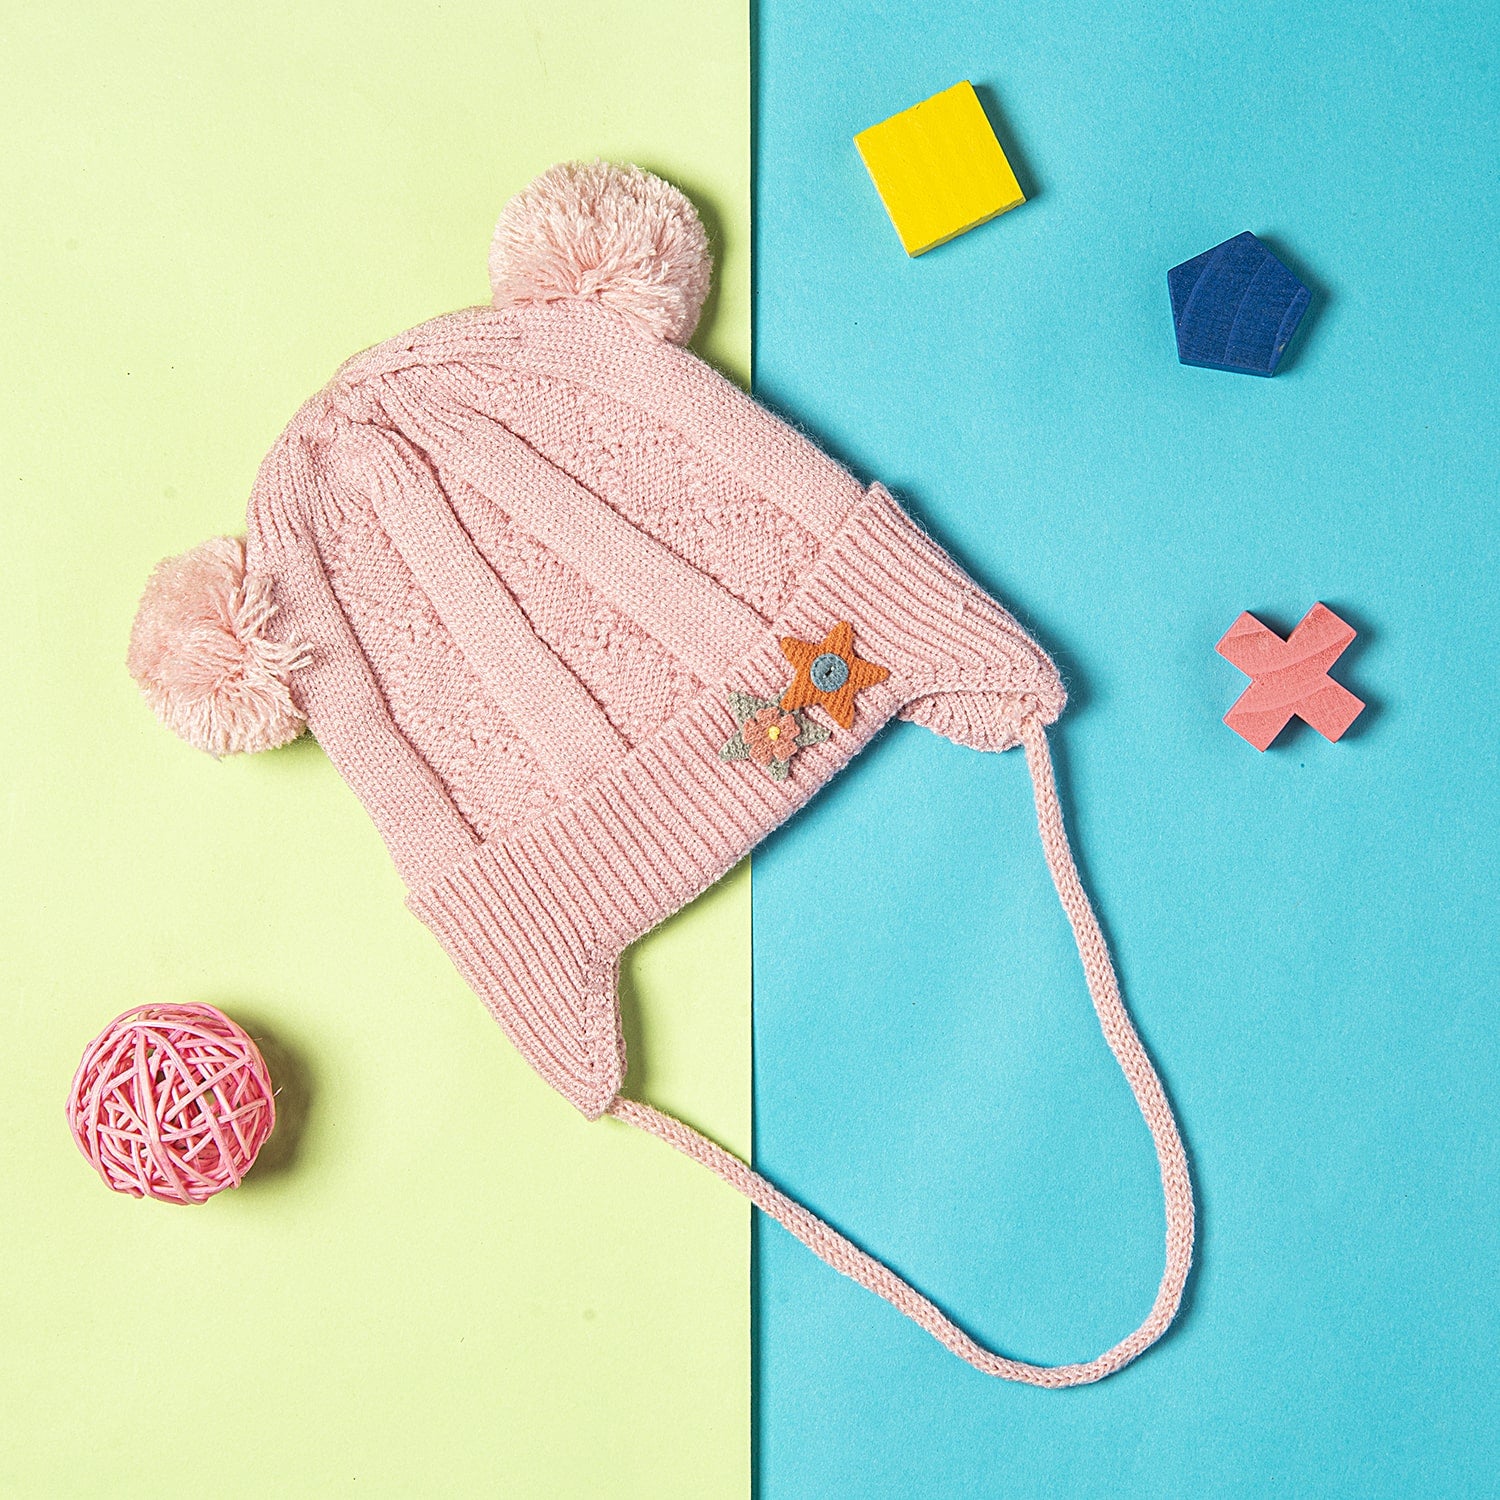 Knit Woollen Cap With Tie For Ear Cover Starry Pom Pom Pink